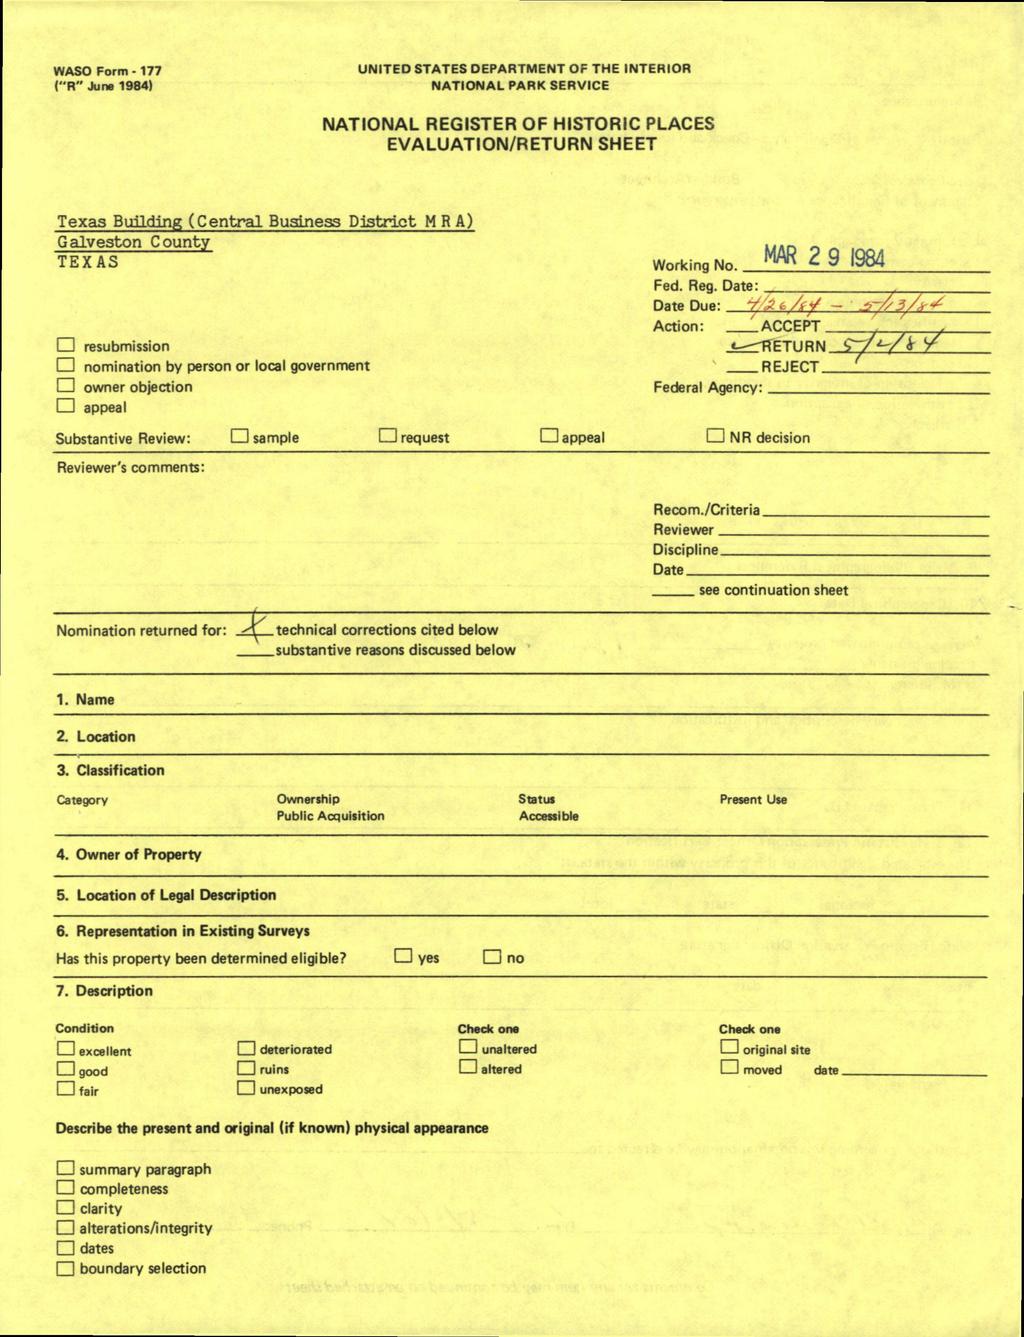 WASO Form - 177 ("R" June 1984) UNITED STATES DEPARTMENT OF THE INTERIOR NATIONAL PARK SERVICE NATIONAL REGISTER OF HISTORIC PLACES EVALUATION/RETURN SHEET Texas Building (Central Business District